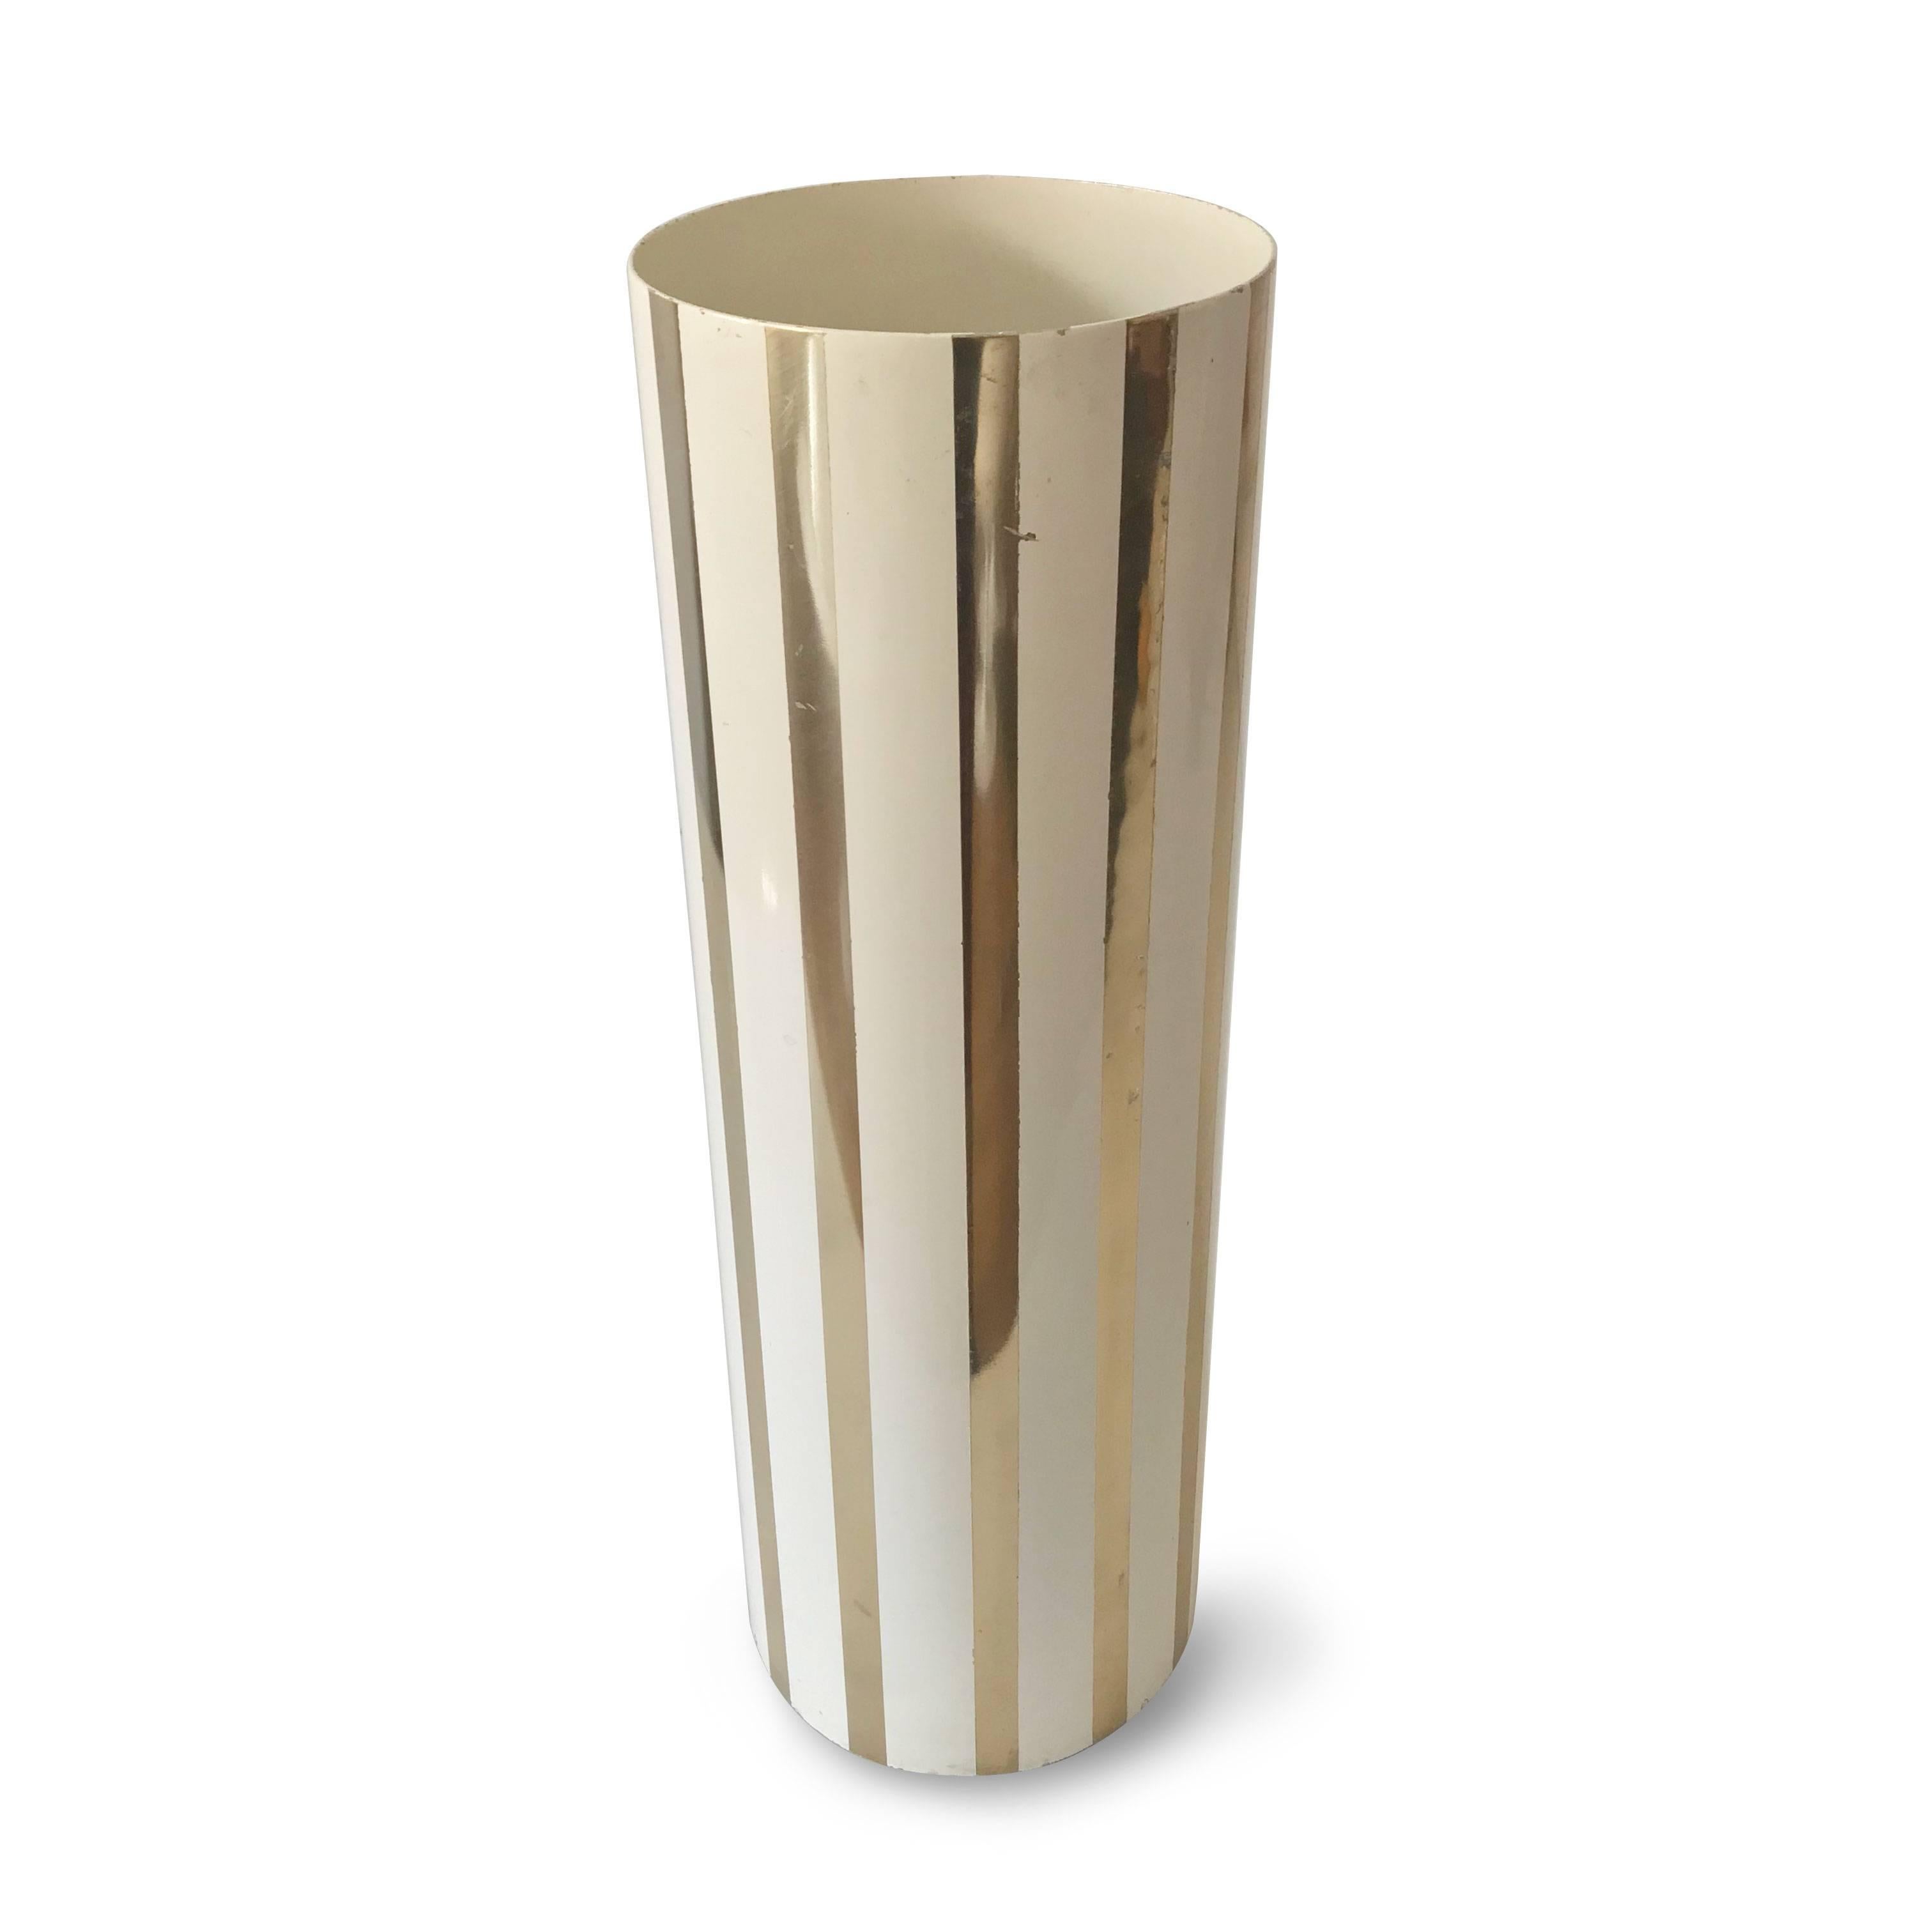 Italian Mid Century Modern Umbrella Stand by Piero Fornasetti (Attributed) Italy 1950s For Sale